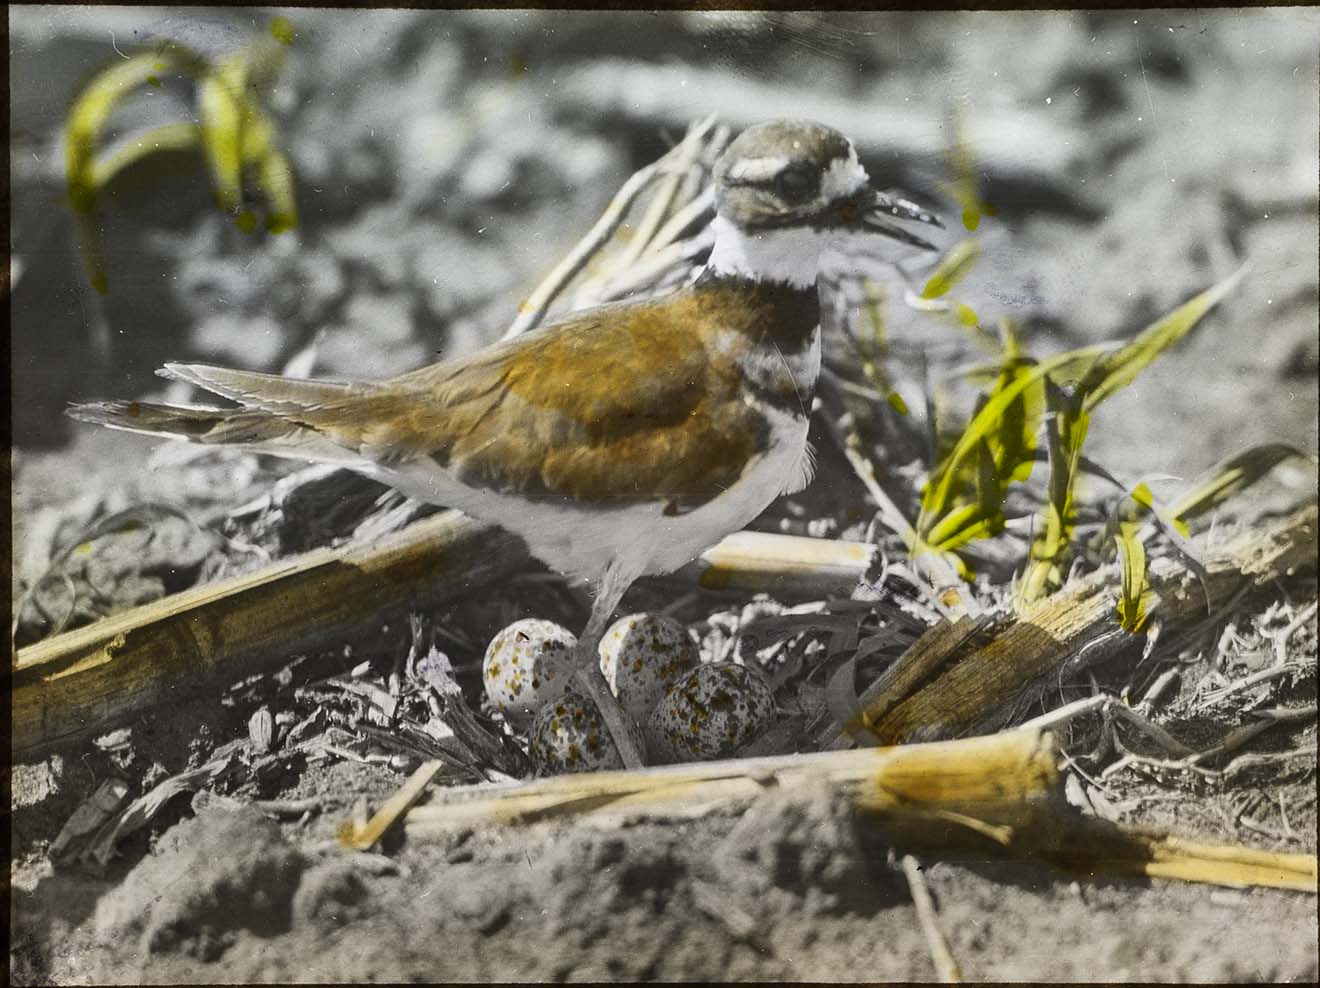 Lantern slide and photograph of a Killdeer standing by a nest